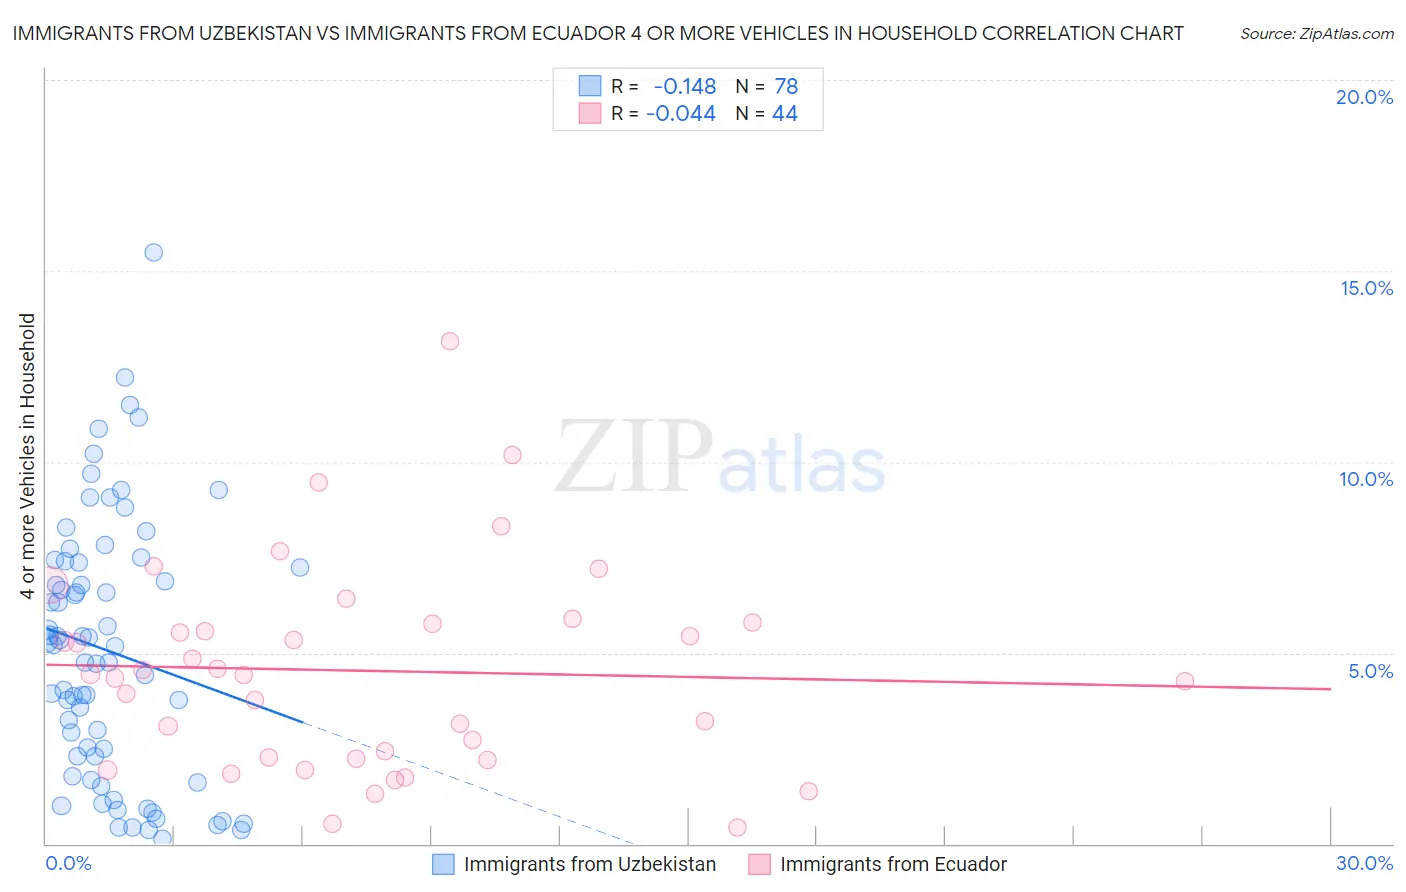 Immigrants from Uzbekistan vs Immigrants from Ecuador 4 or more Vehicles in Household